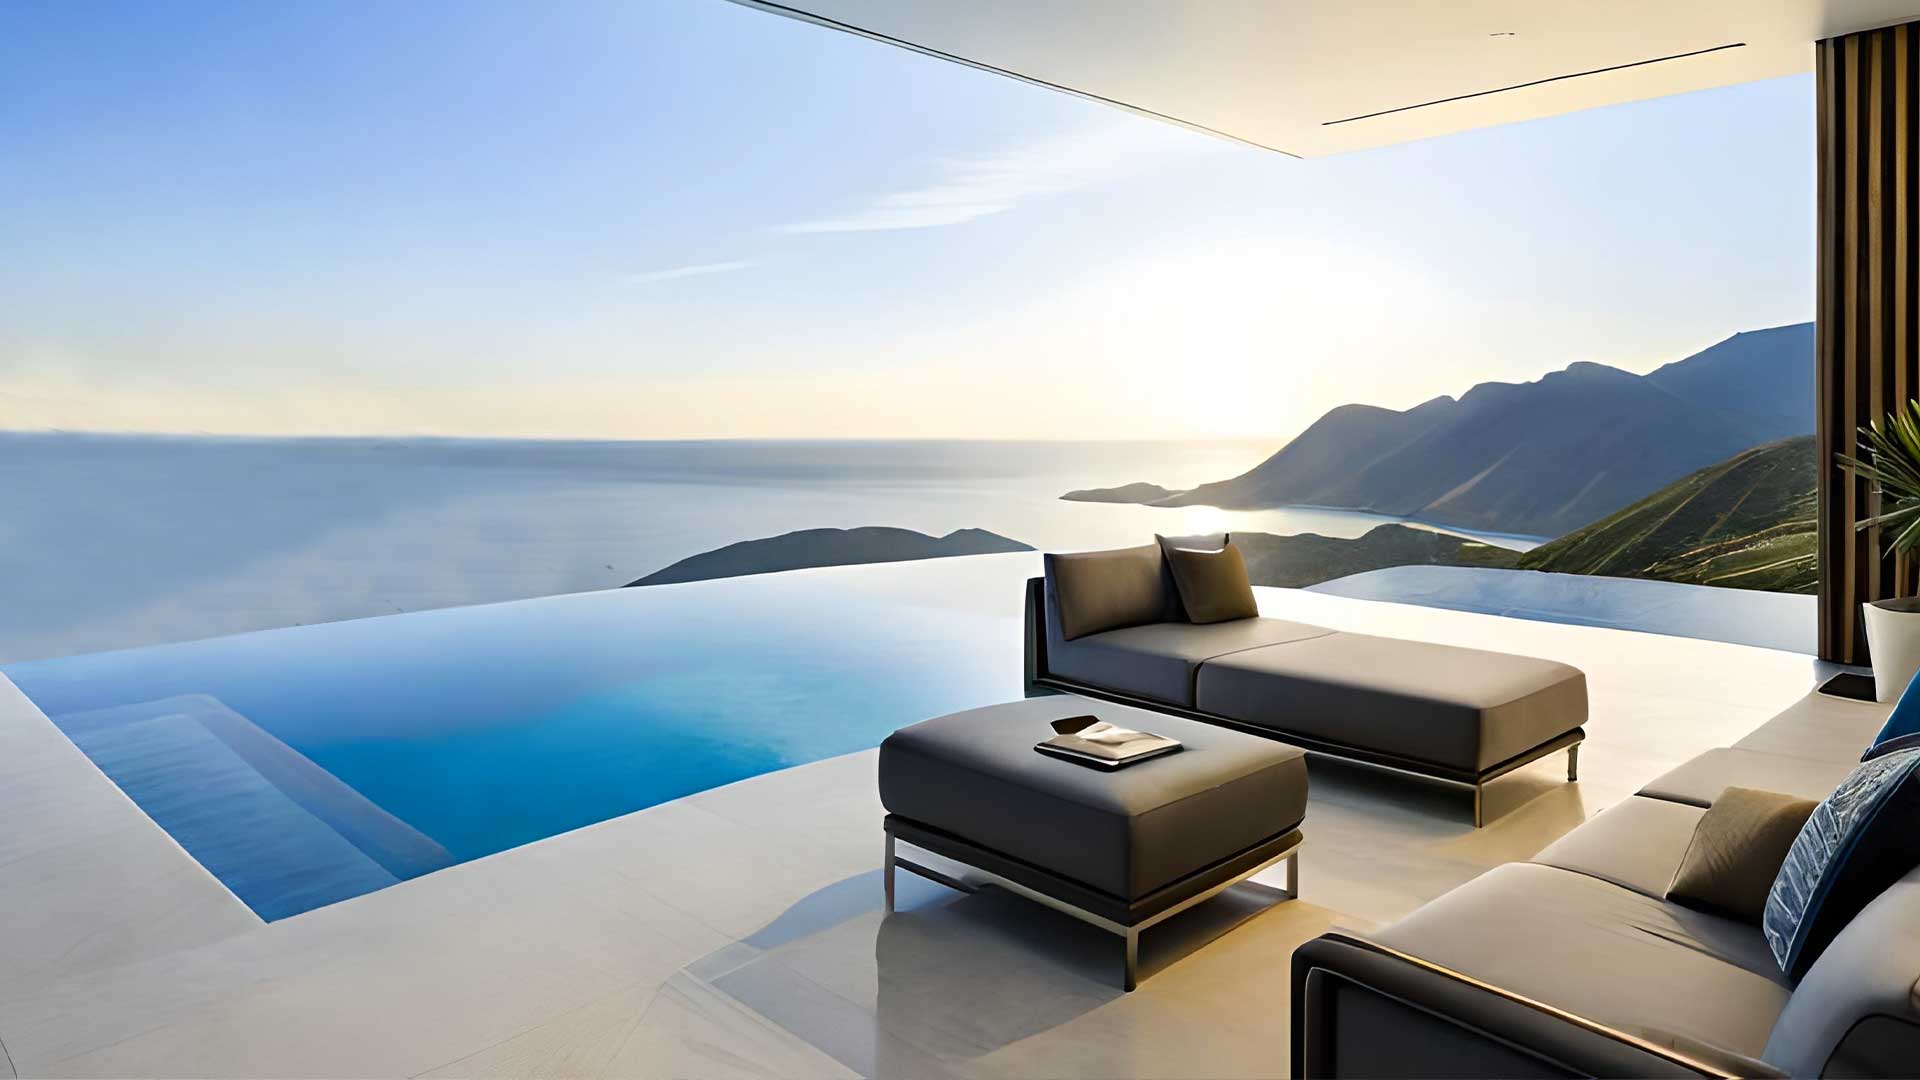 Modern outdoor lounge area with sleek furniture overlooking an infinity pool with a panoramic view of the sea and mountains in Meganisi.